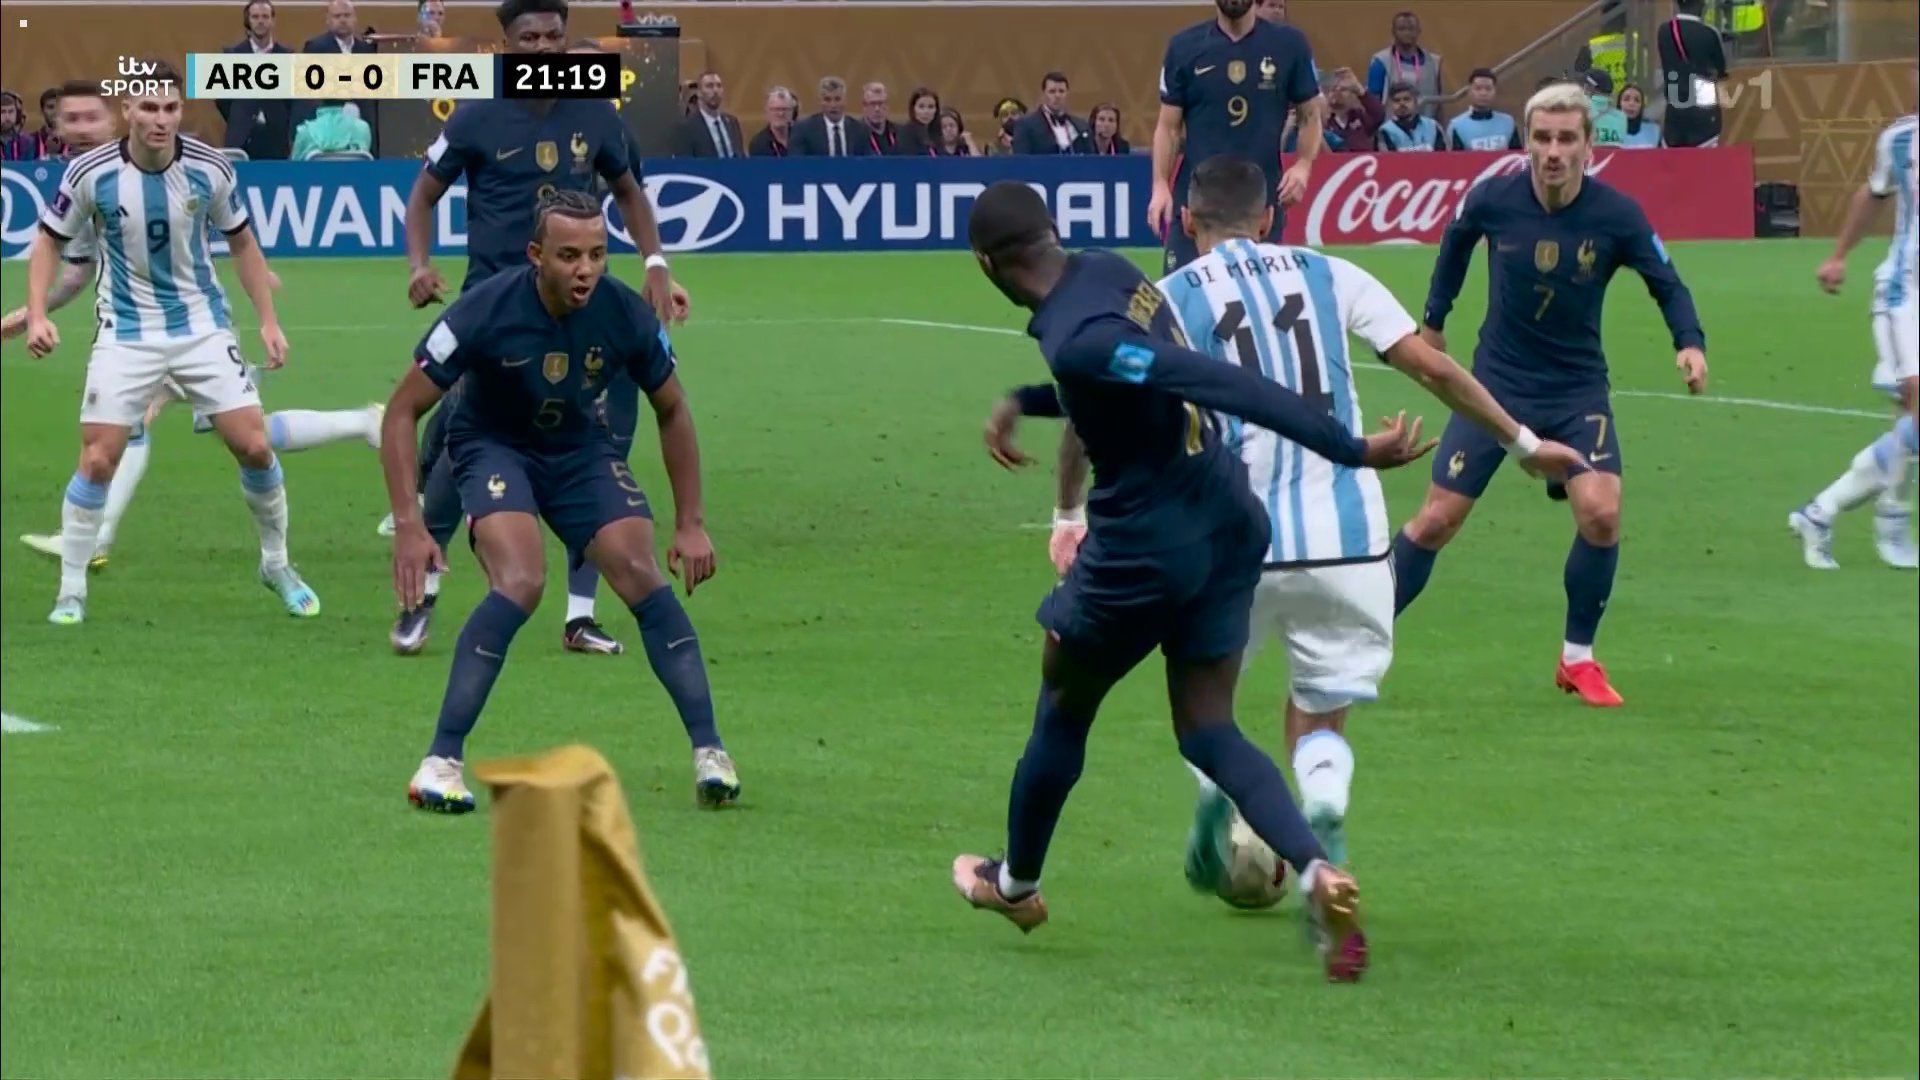 Penalty or not? Fans argue as Lionel Messi scores from spot, gives Argentina lead vs France in FIFA World Cup